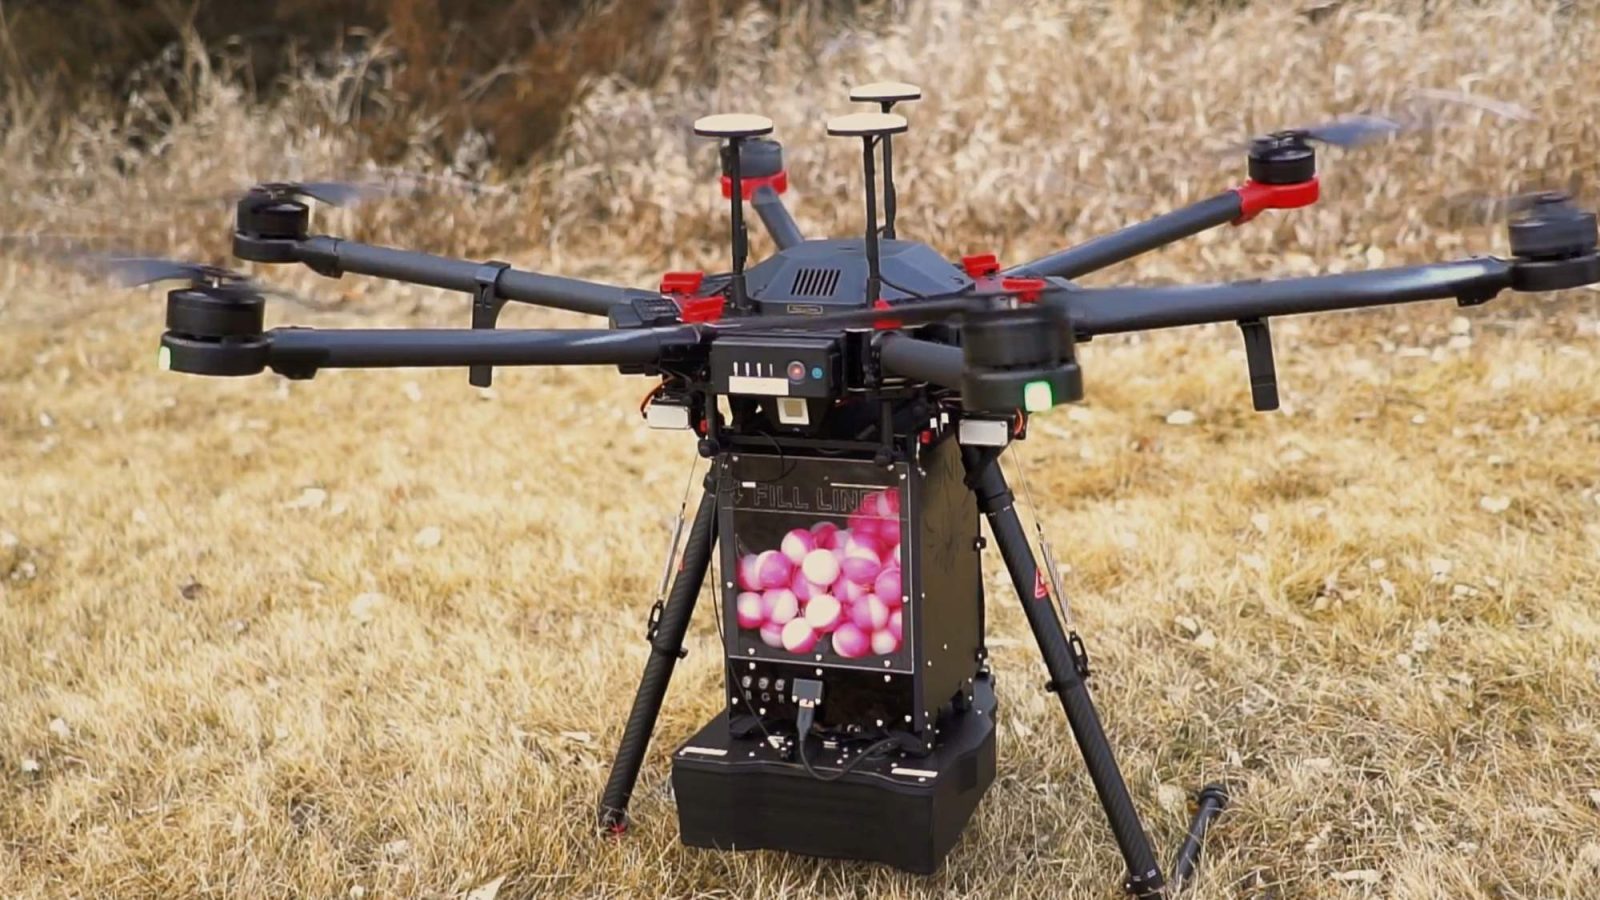 Self-igniting-eggs-dropped-by-‘dragon’-drones-can-help-save-lives.jpg